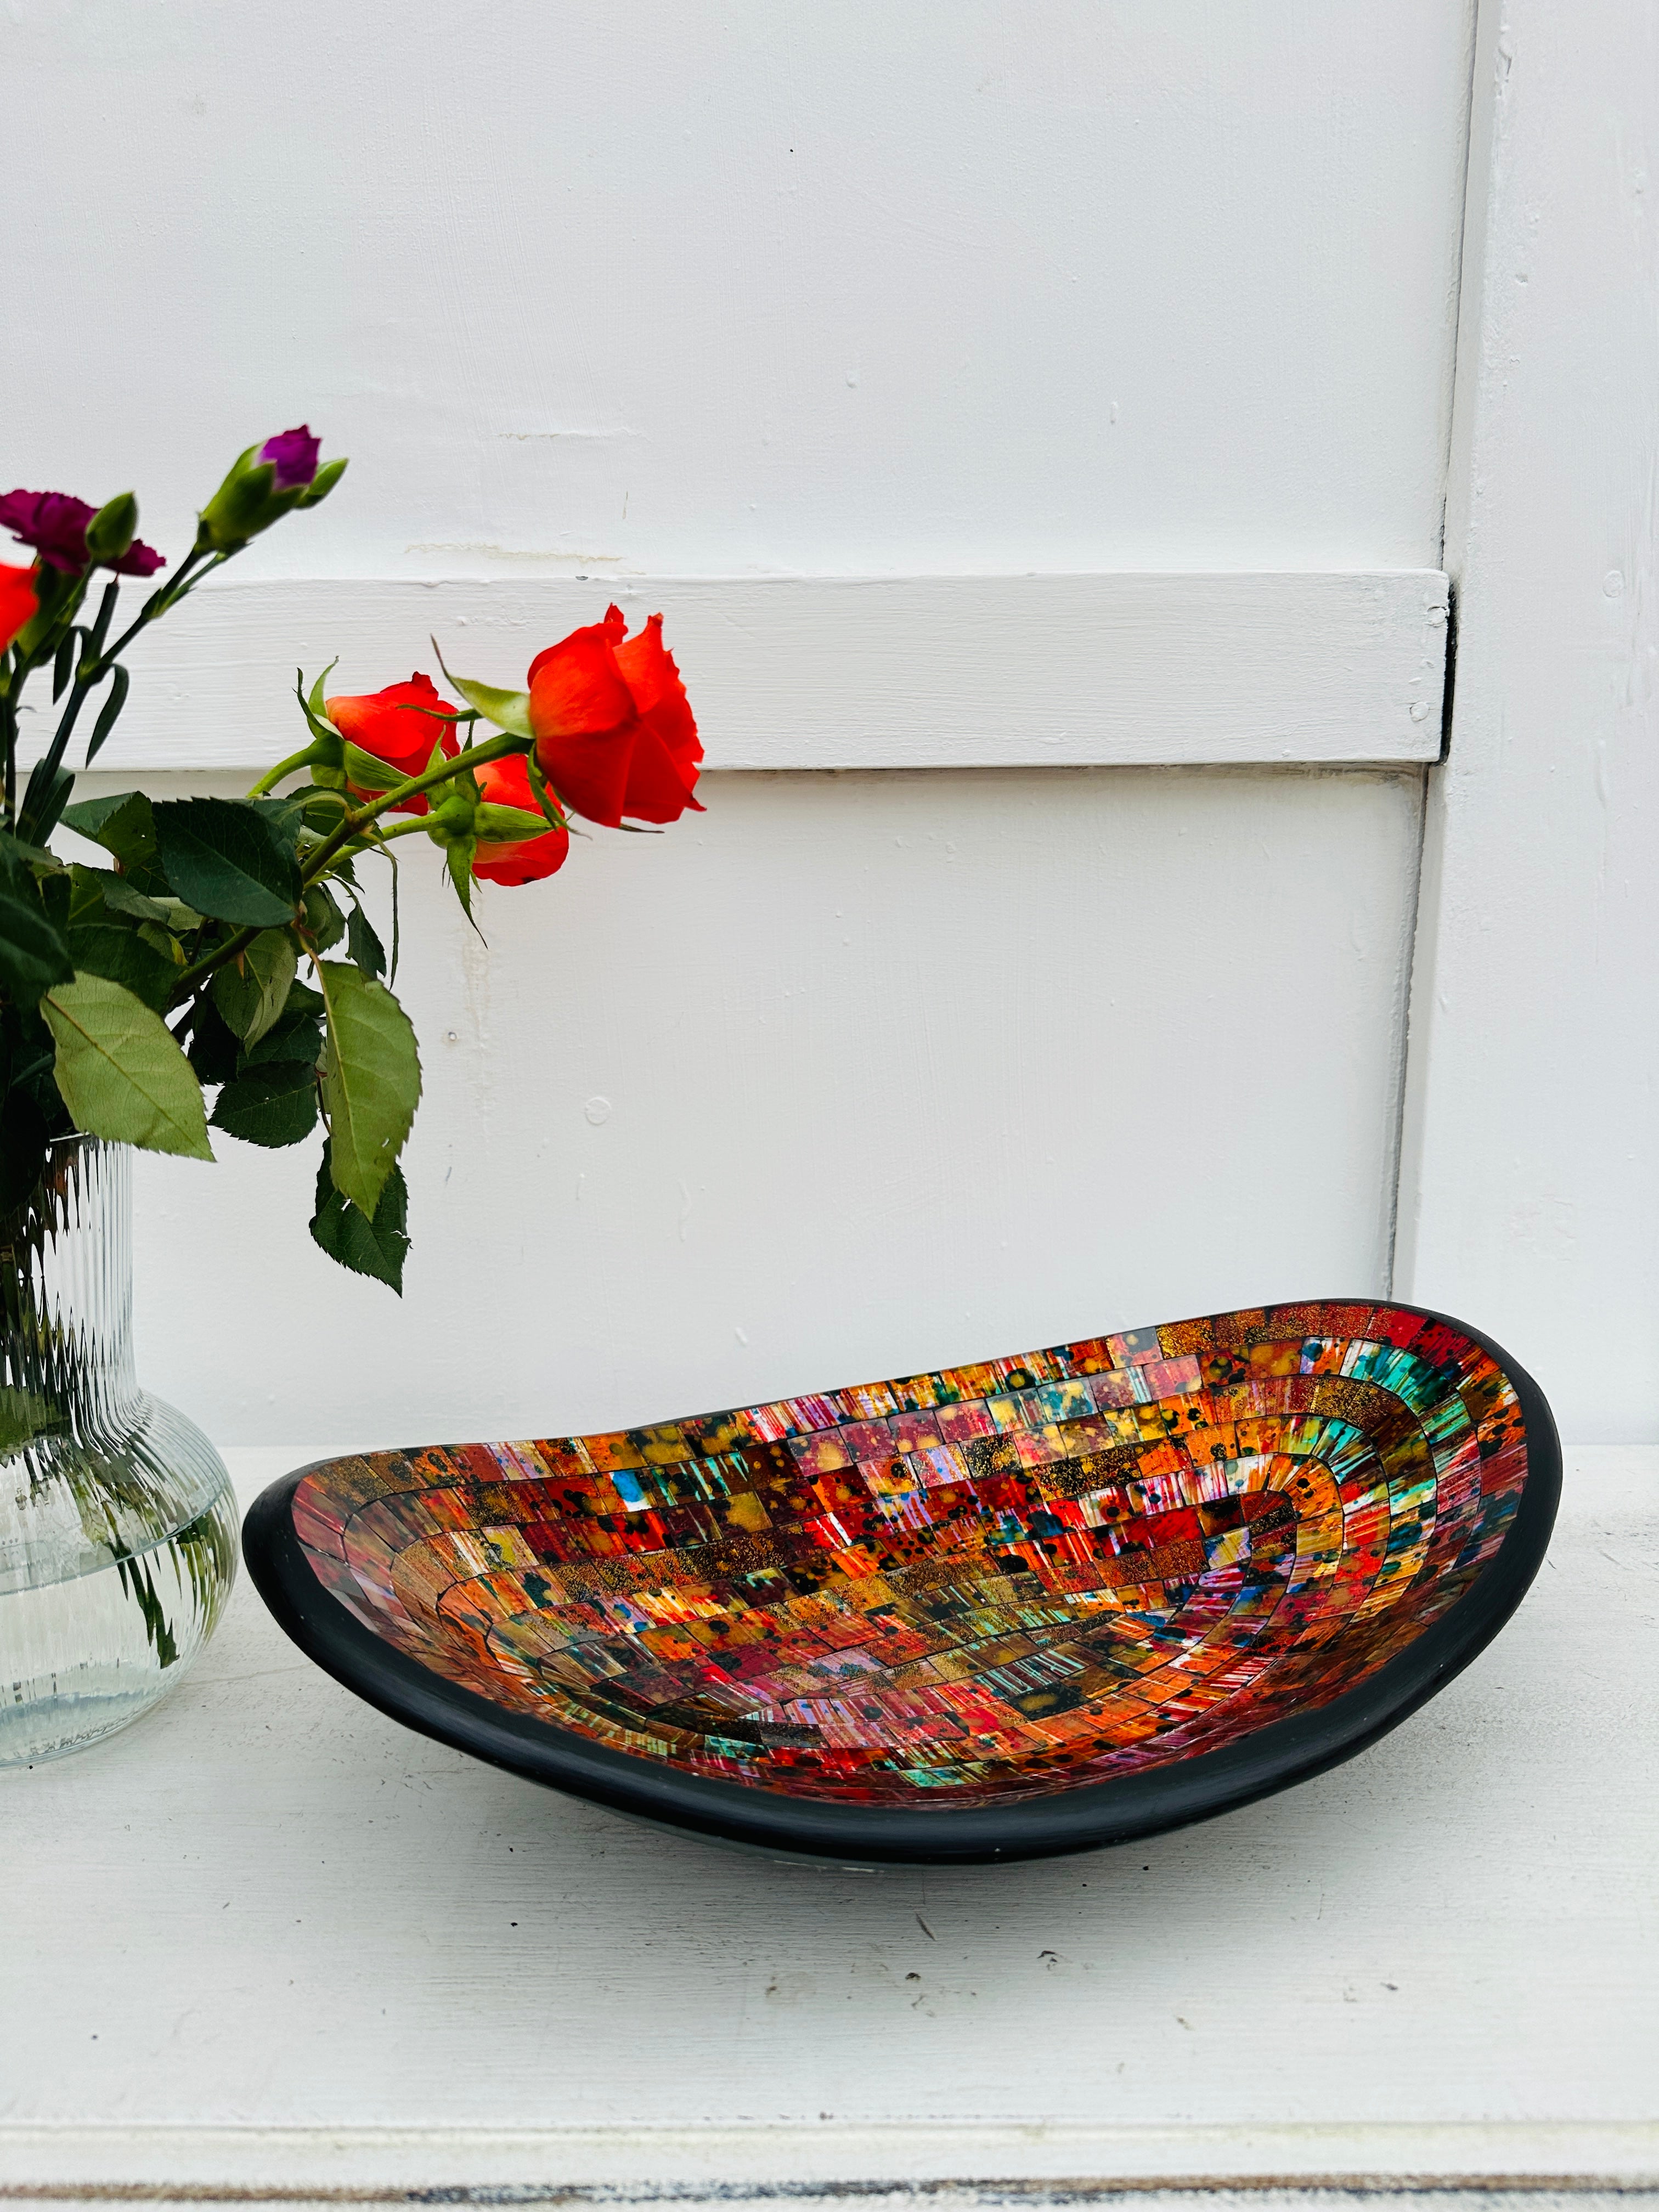 display view of mosaic oval bowl next to a vase of roses